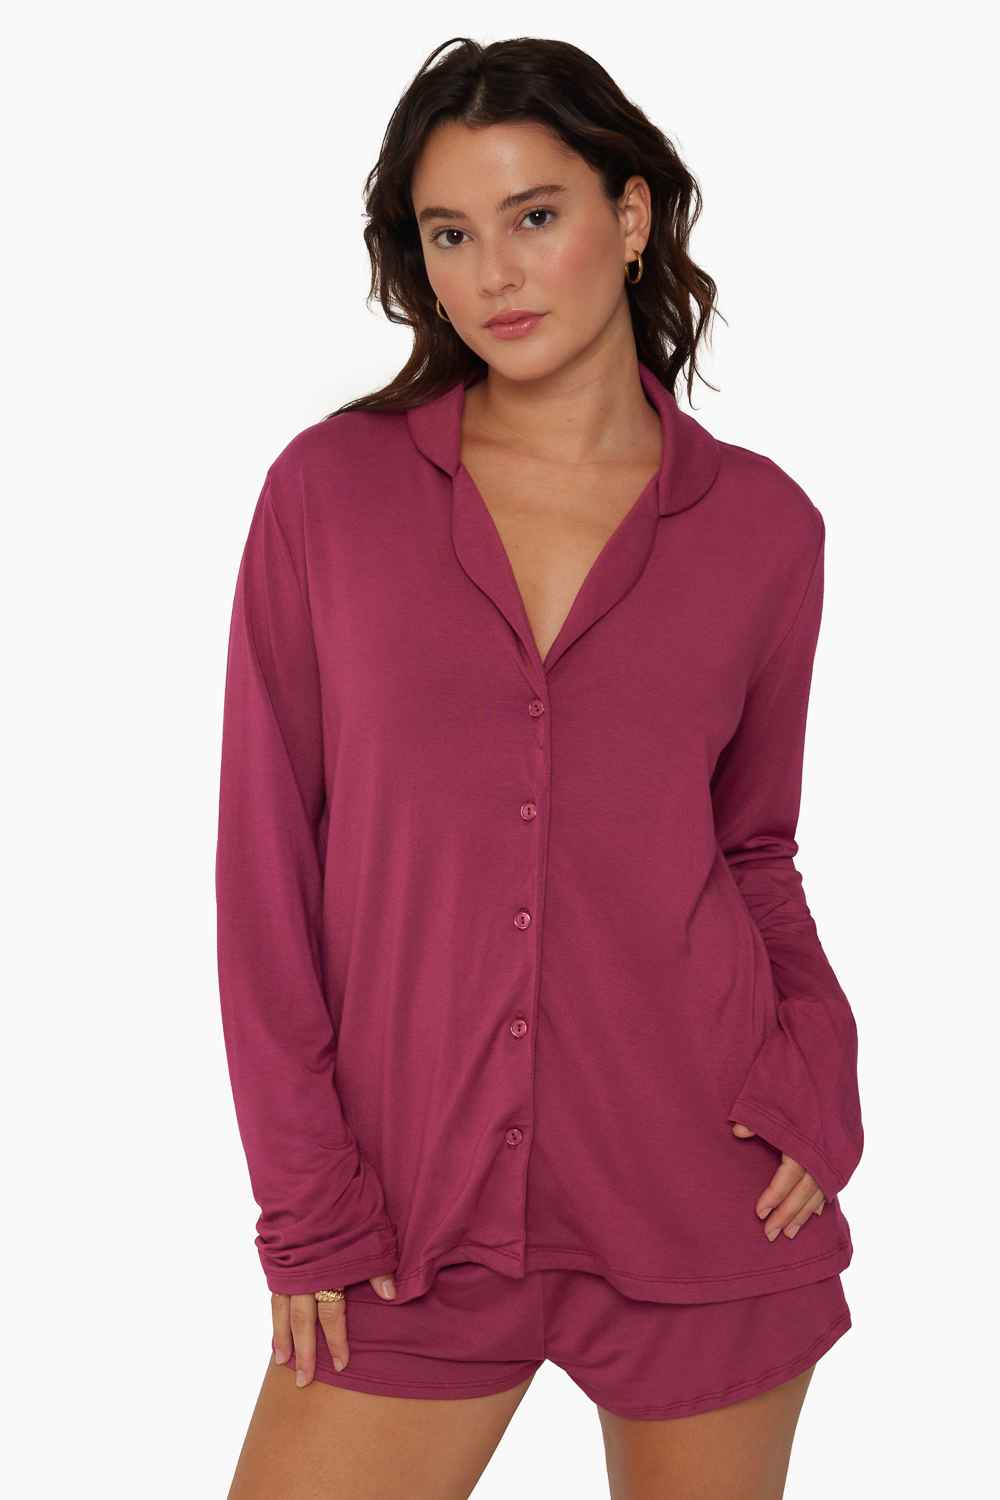 SLEEP JERSEY SLEEP BUTTON DOWN - ORCHID Featured Image